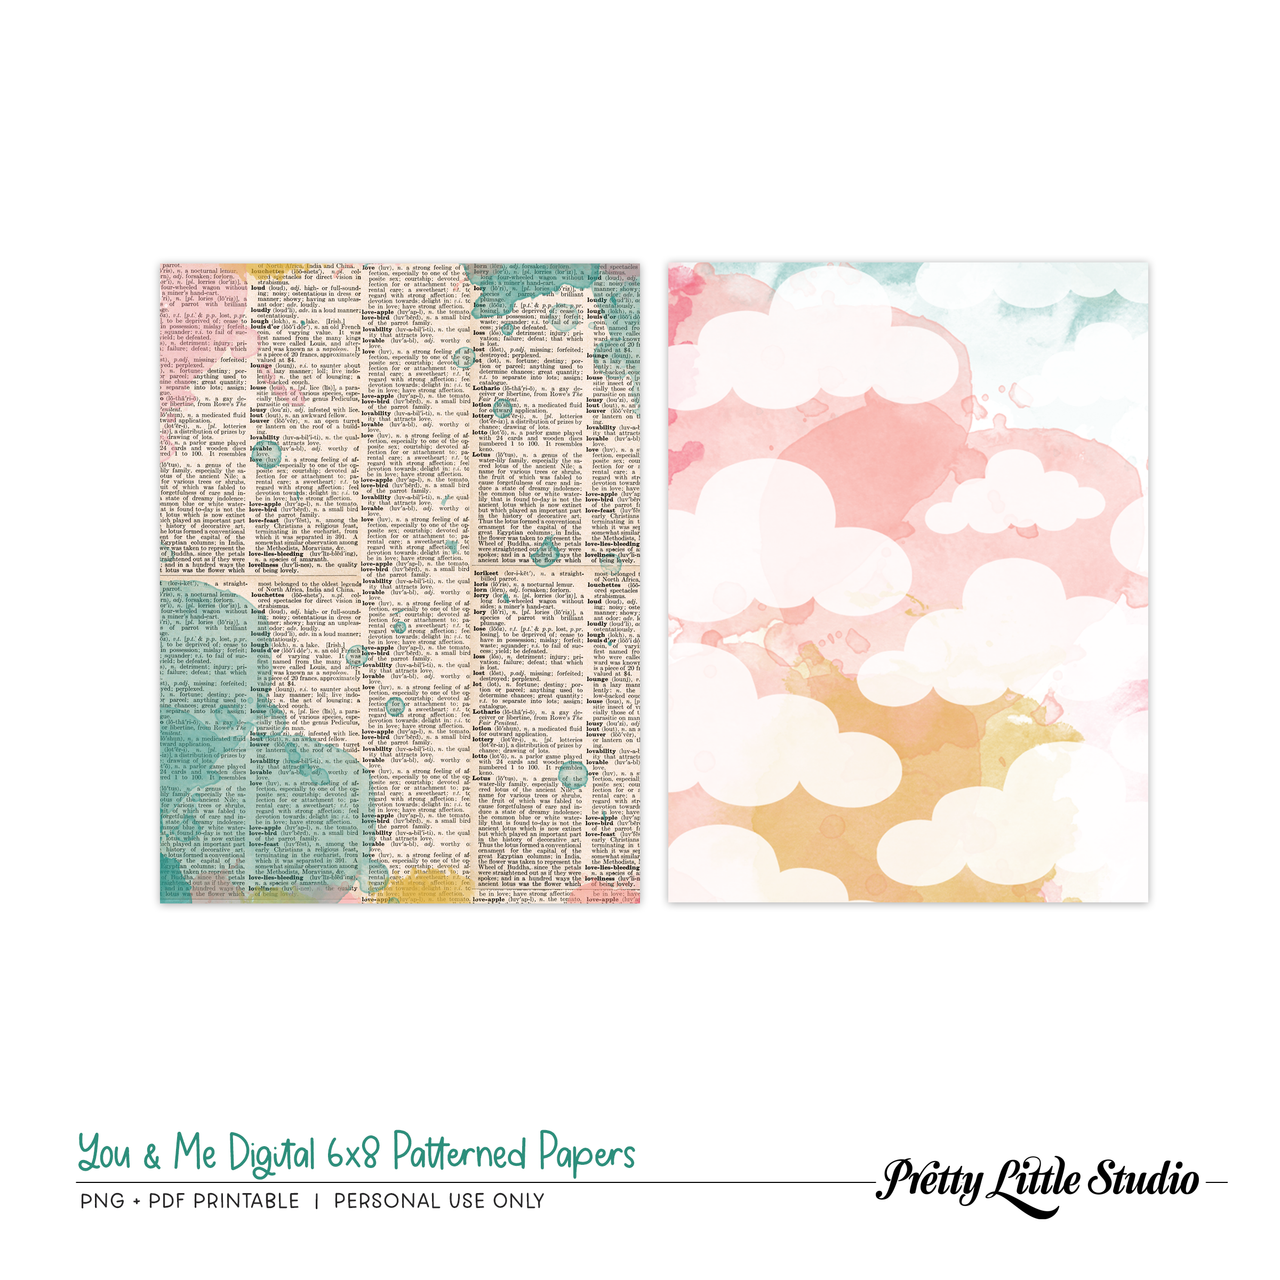 Digital  You & Me 4x4 Patterned Papers - Pretty Little Studio